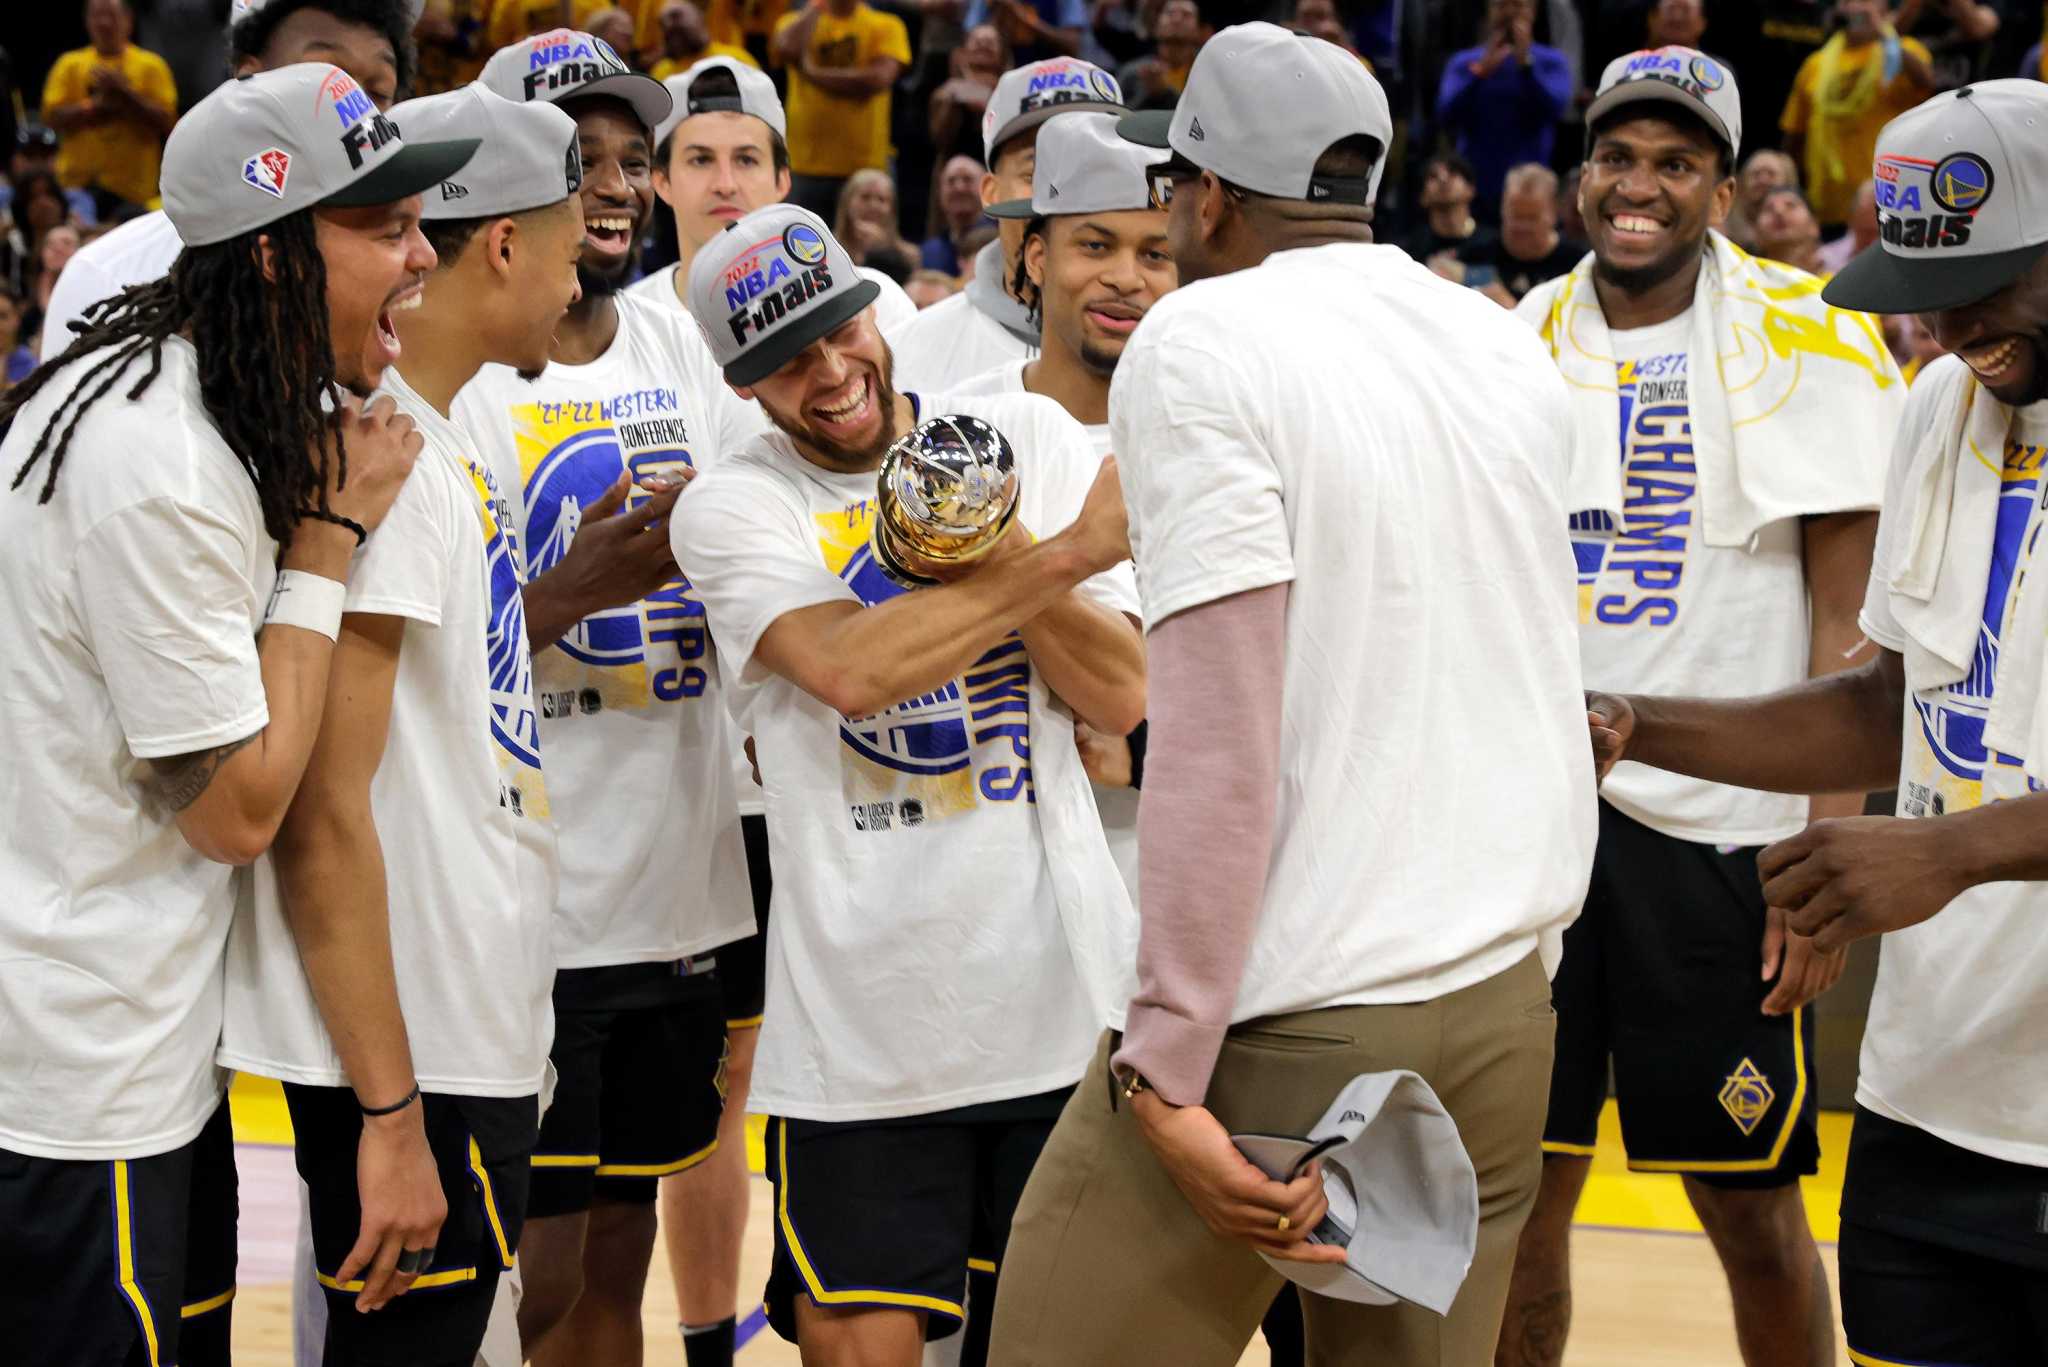 Magic Johnson says Stephen Curry should win 2022 Finals MVP